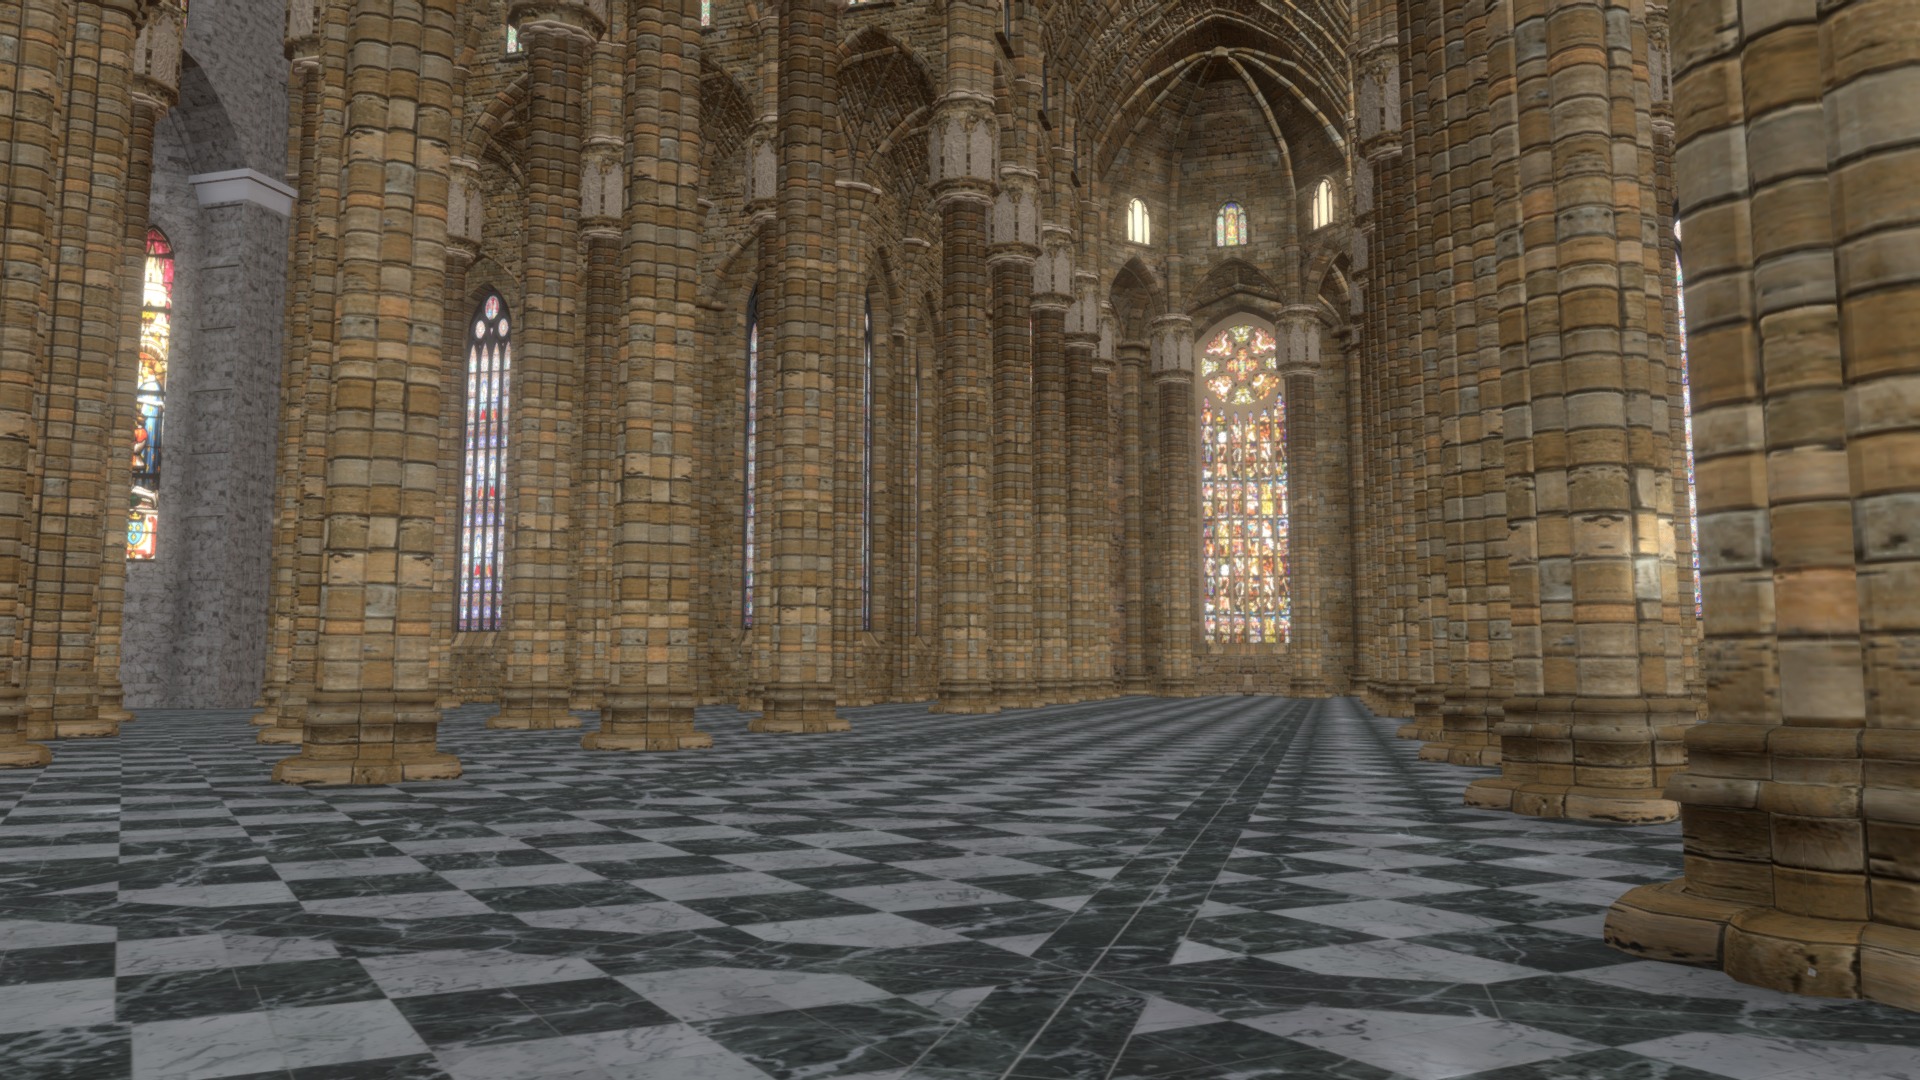 3D model Church Vr Galery - This is a 3D model of the Church Vr Galery. The 3D model is about a brick building with arched windows.